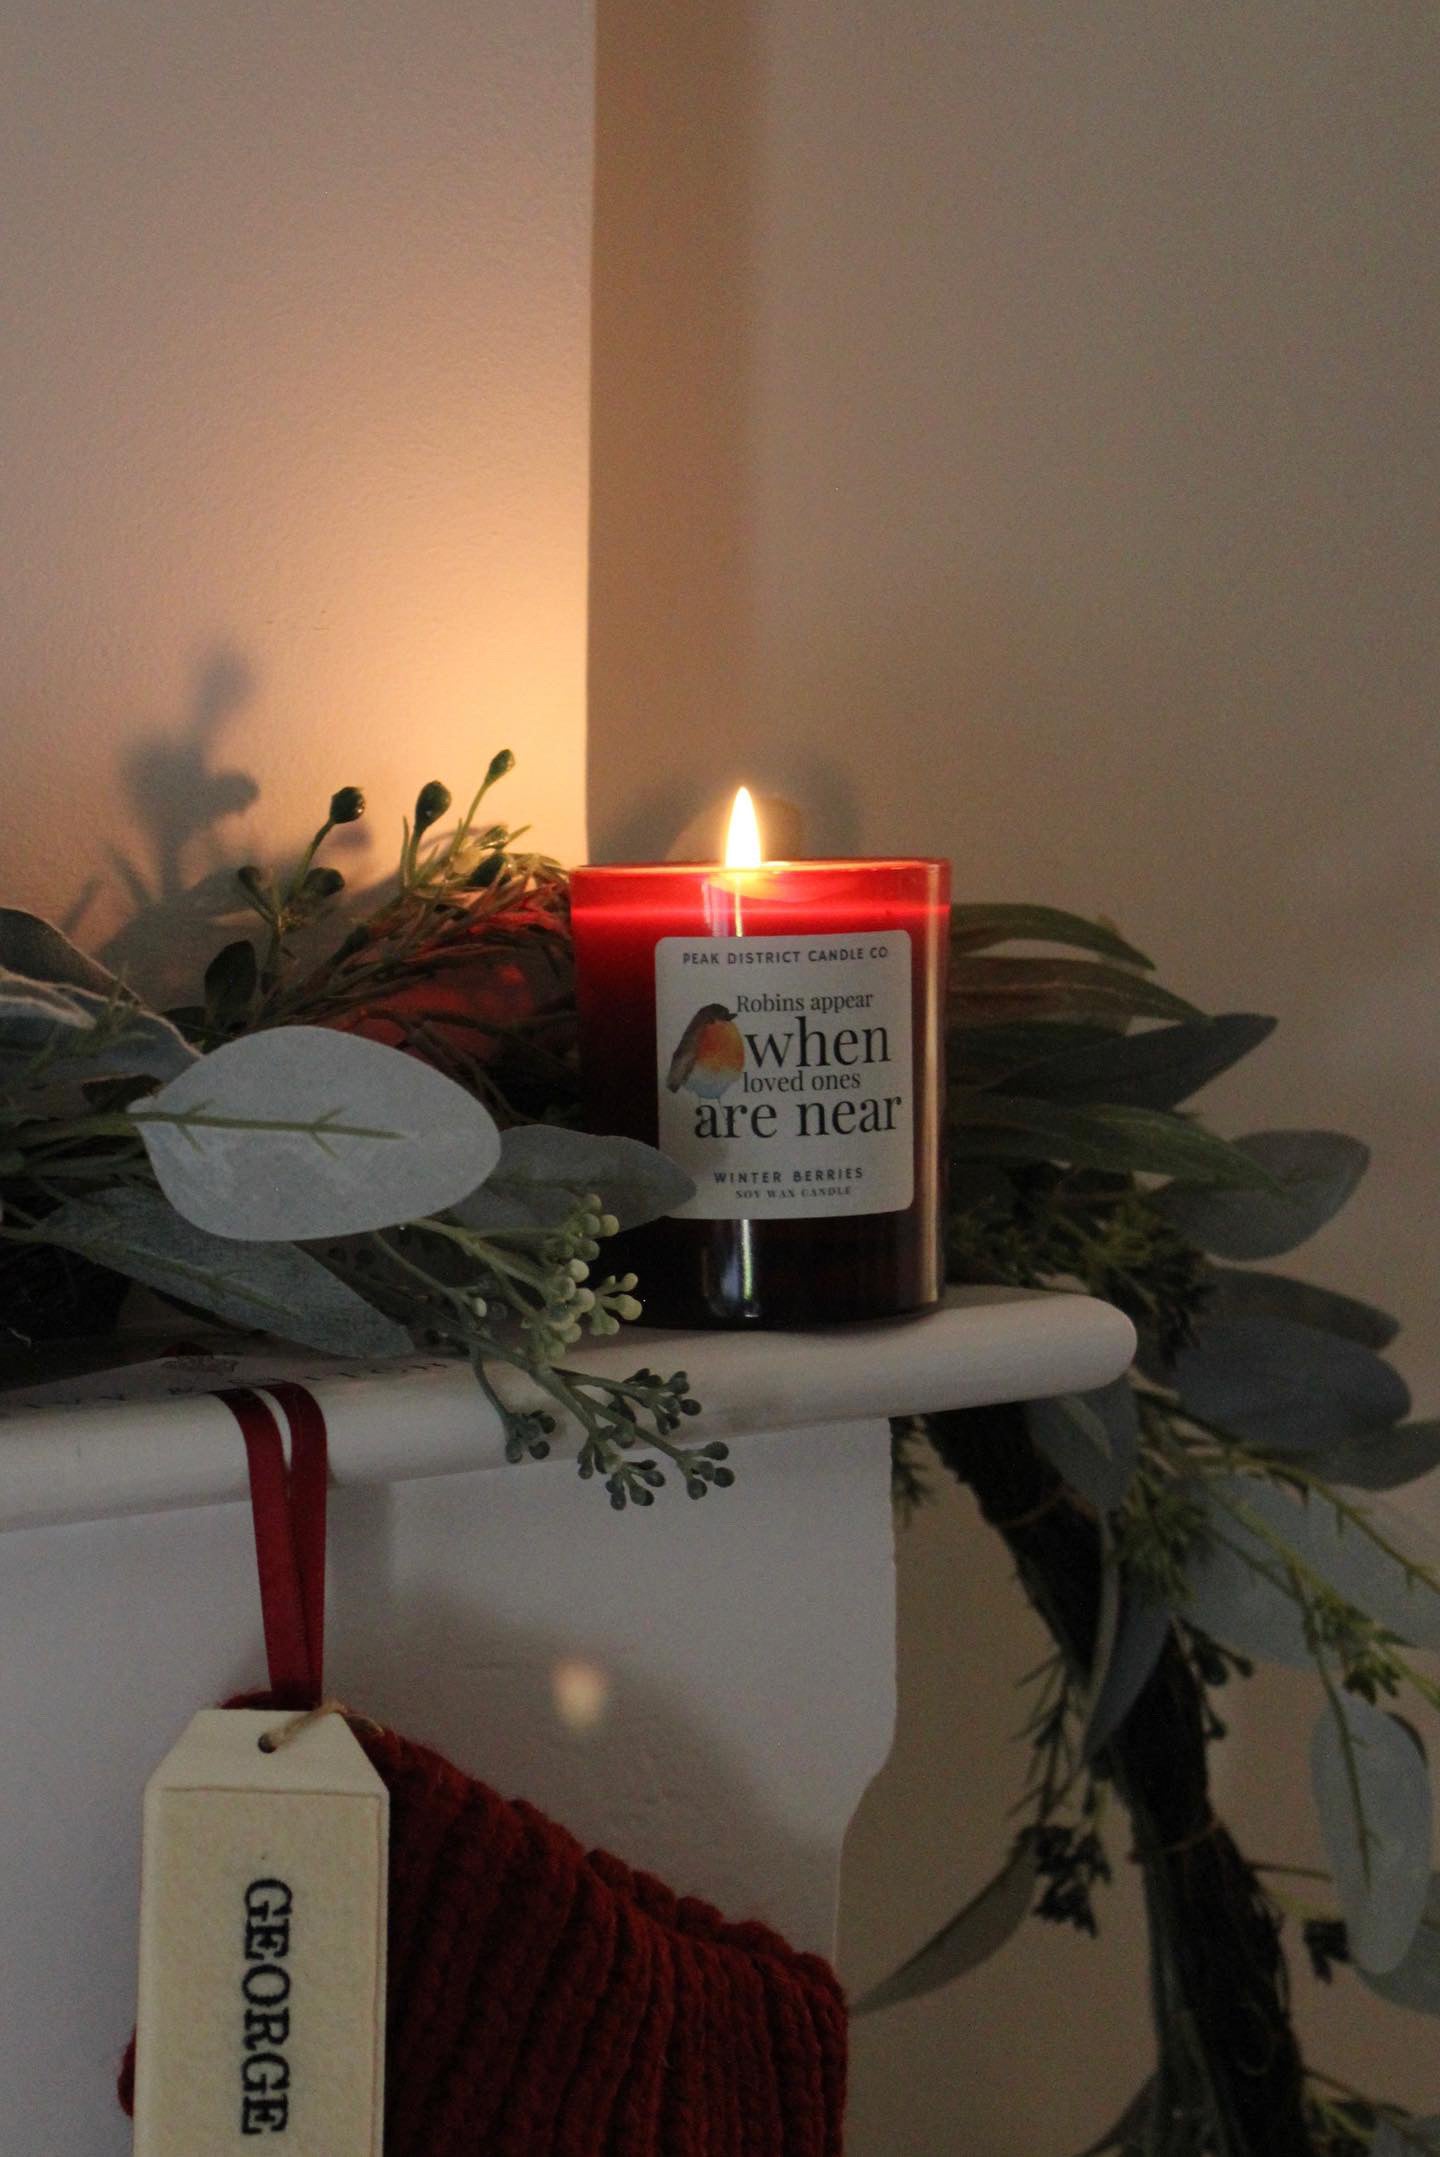 “Robins Appear…” Winter Berries Candle